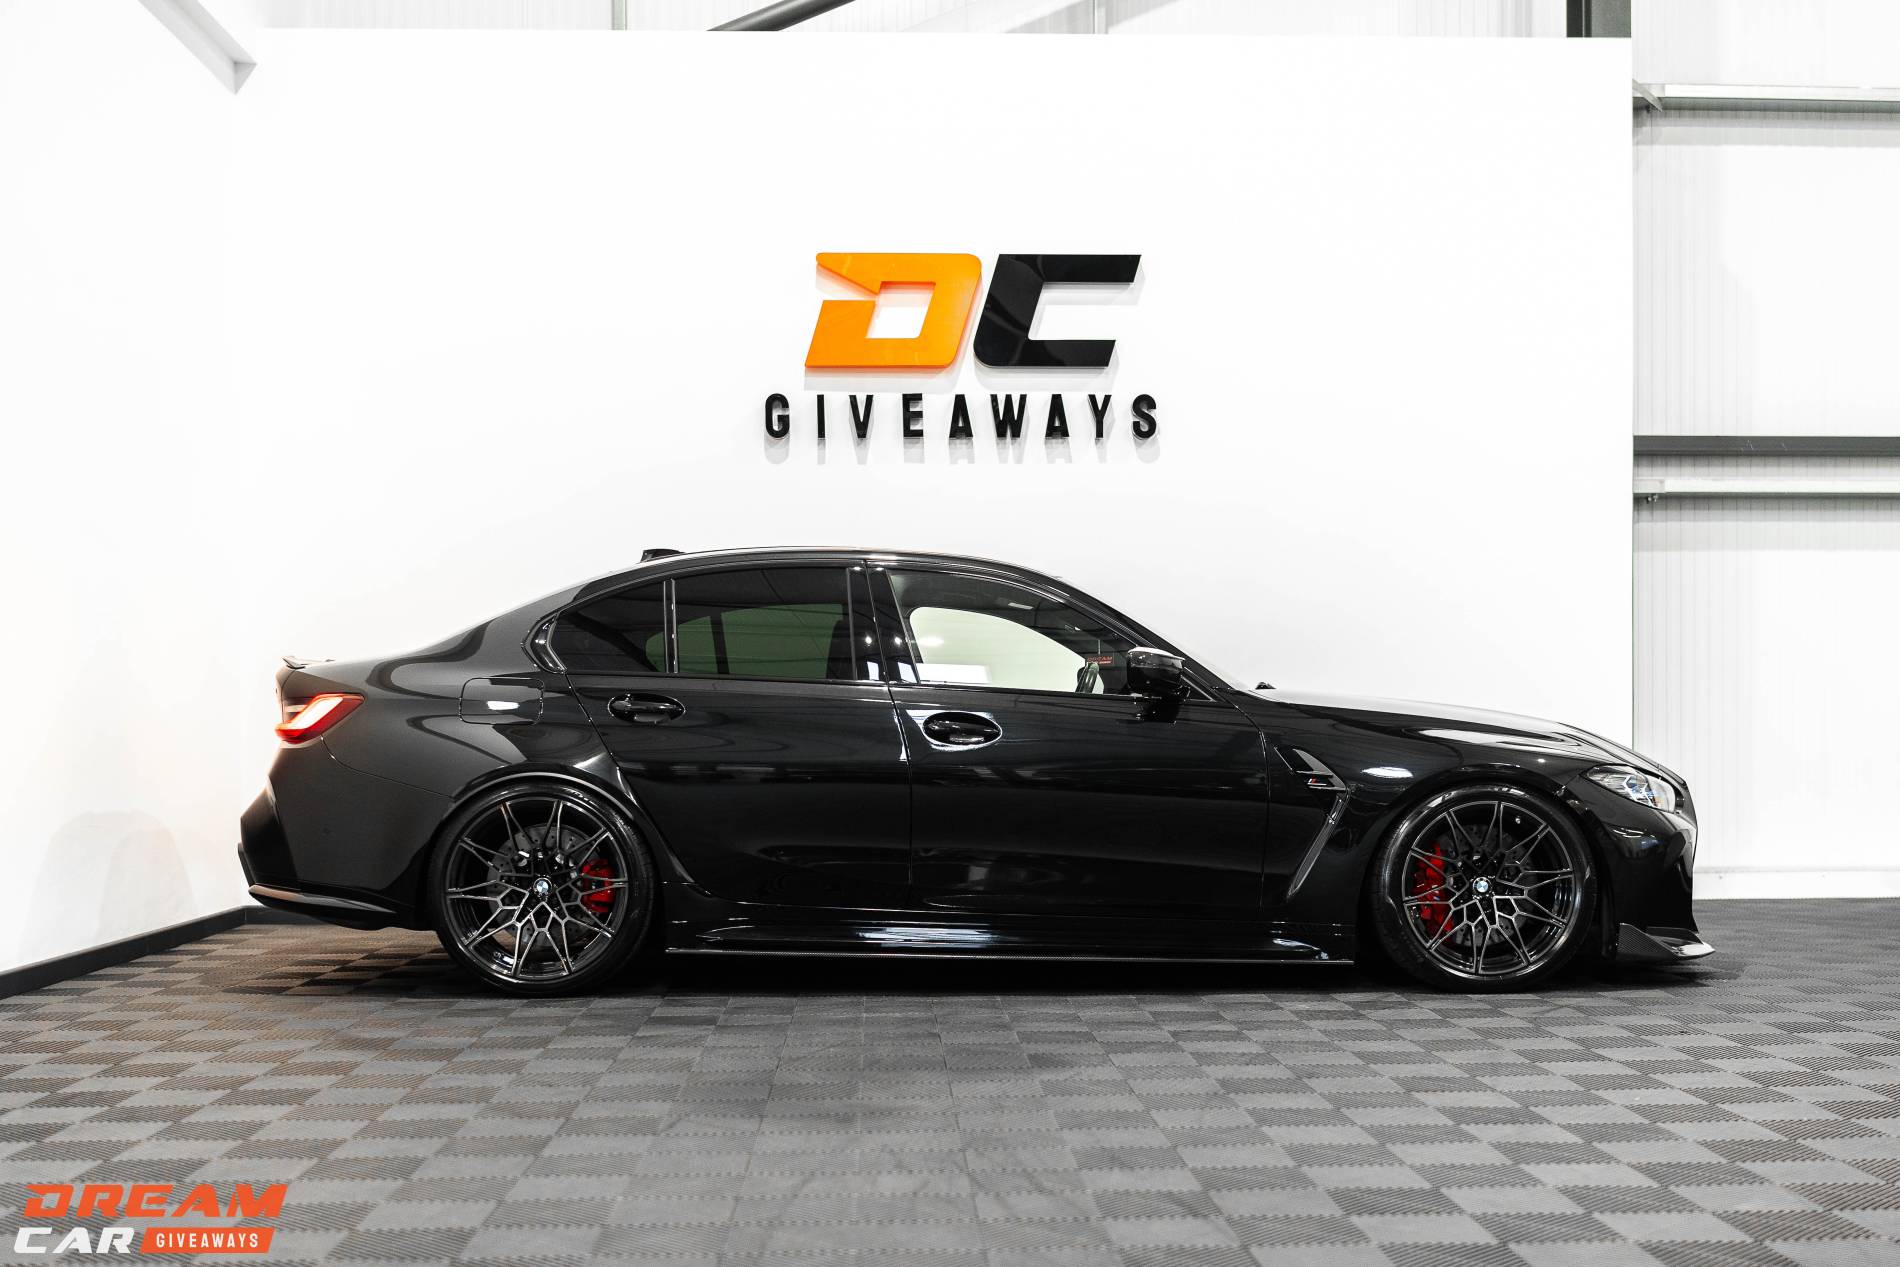 Win this 2021 BMW M3 X-Drive & £1,000 or £58,000